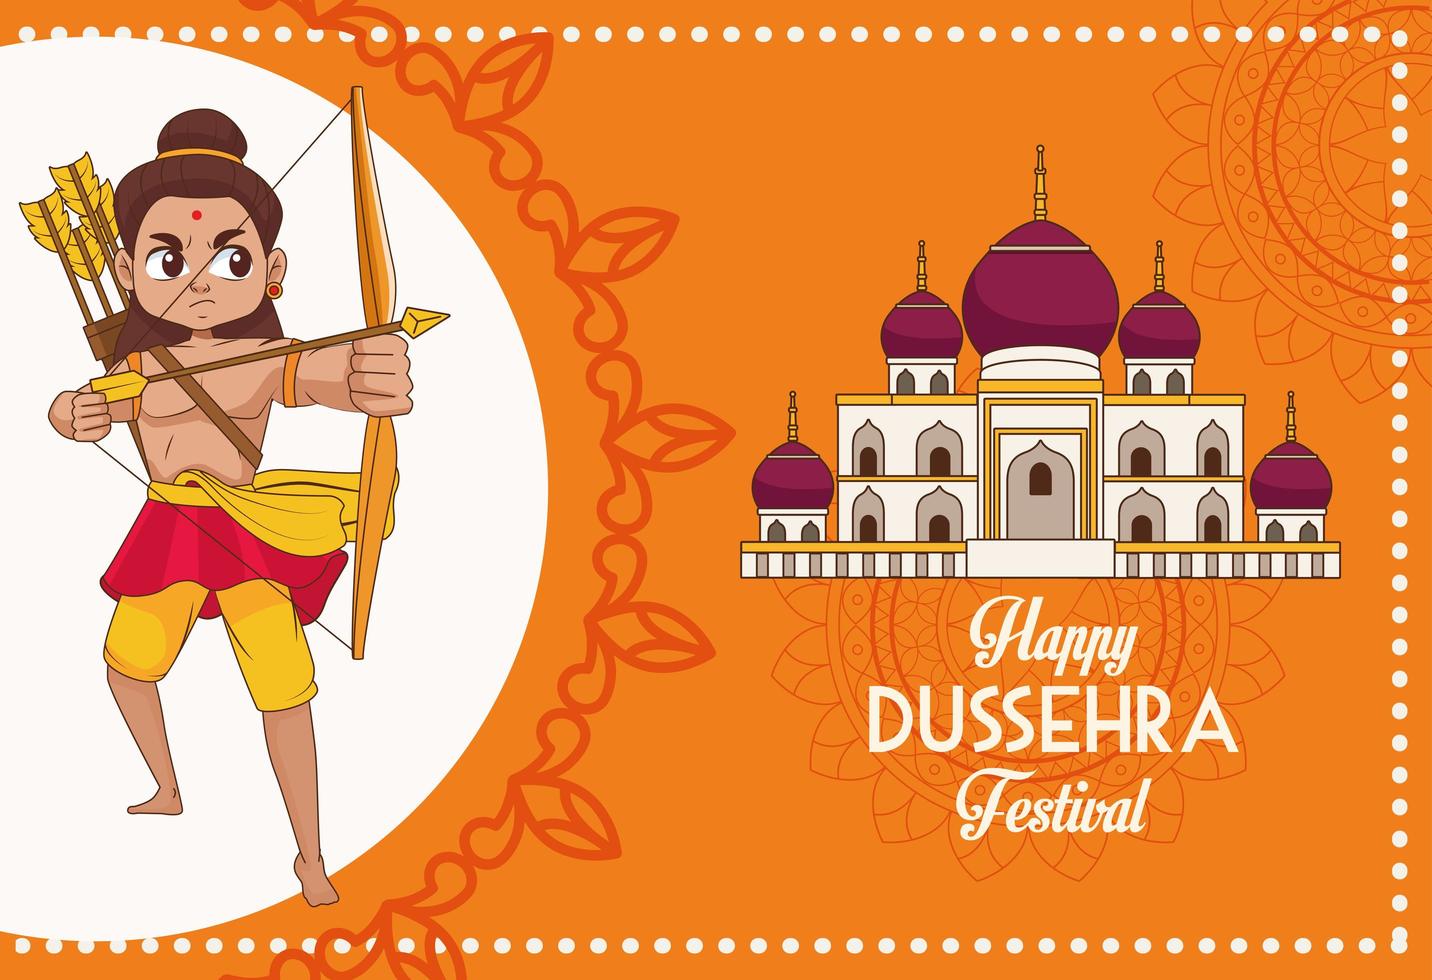 happy dussehra festival poster with rama character and mosque vector